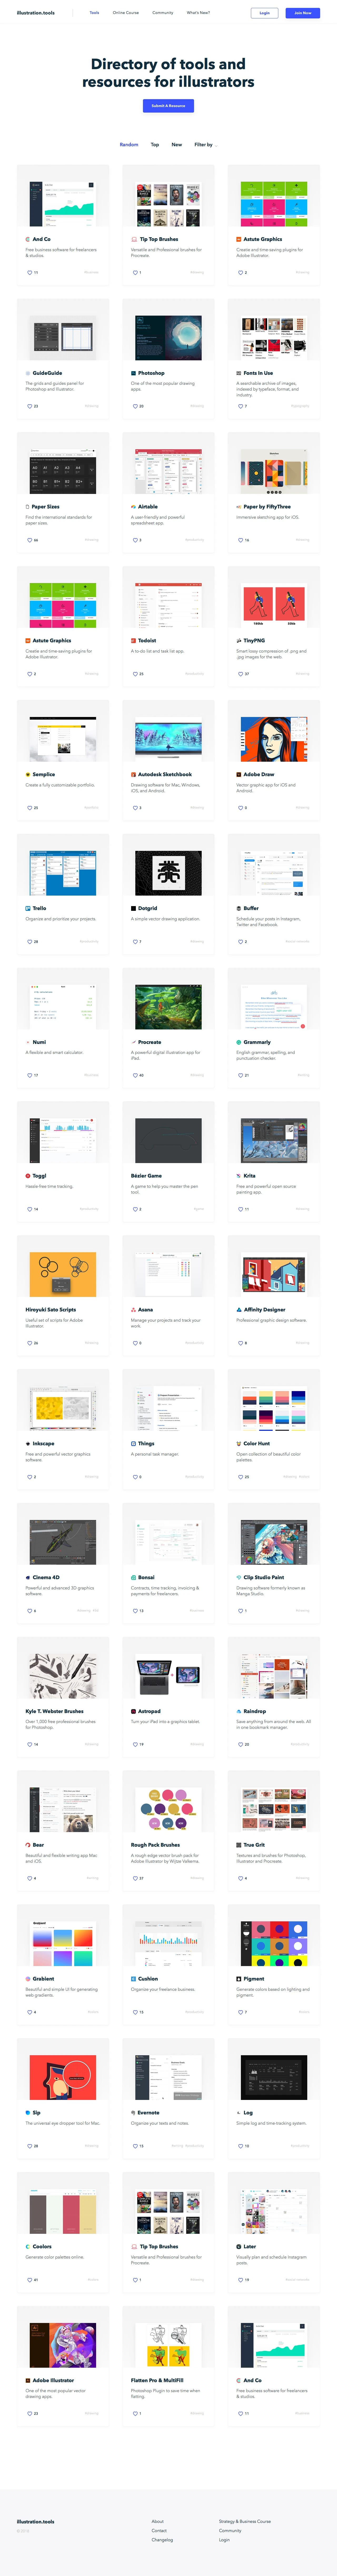 Illustration Tools Landing Page Example: Directory of tools and resources for illustrators